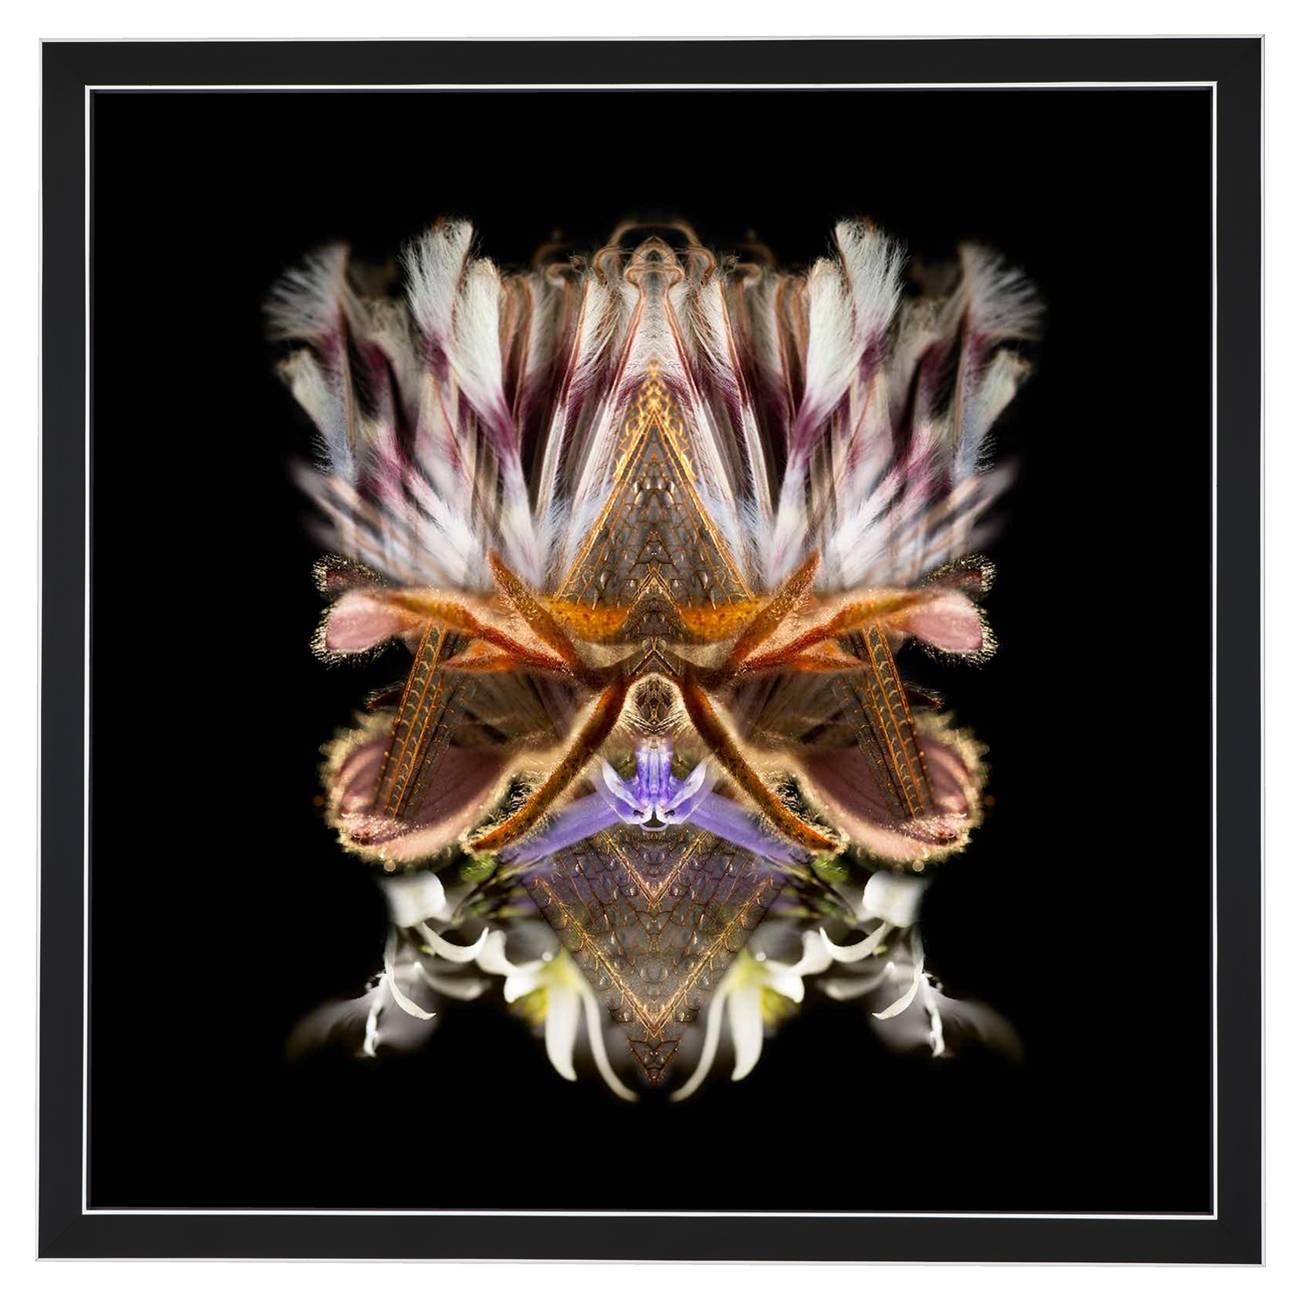 Limited edition. Each image is uniquely printed directly to 5mm acrylic glass using UV cured pigment inks giving each photograph real depth and clarity. Every picture is beautifully framed in-house with a gloss black and silver lacquered frame and